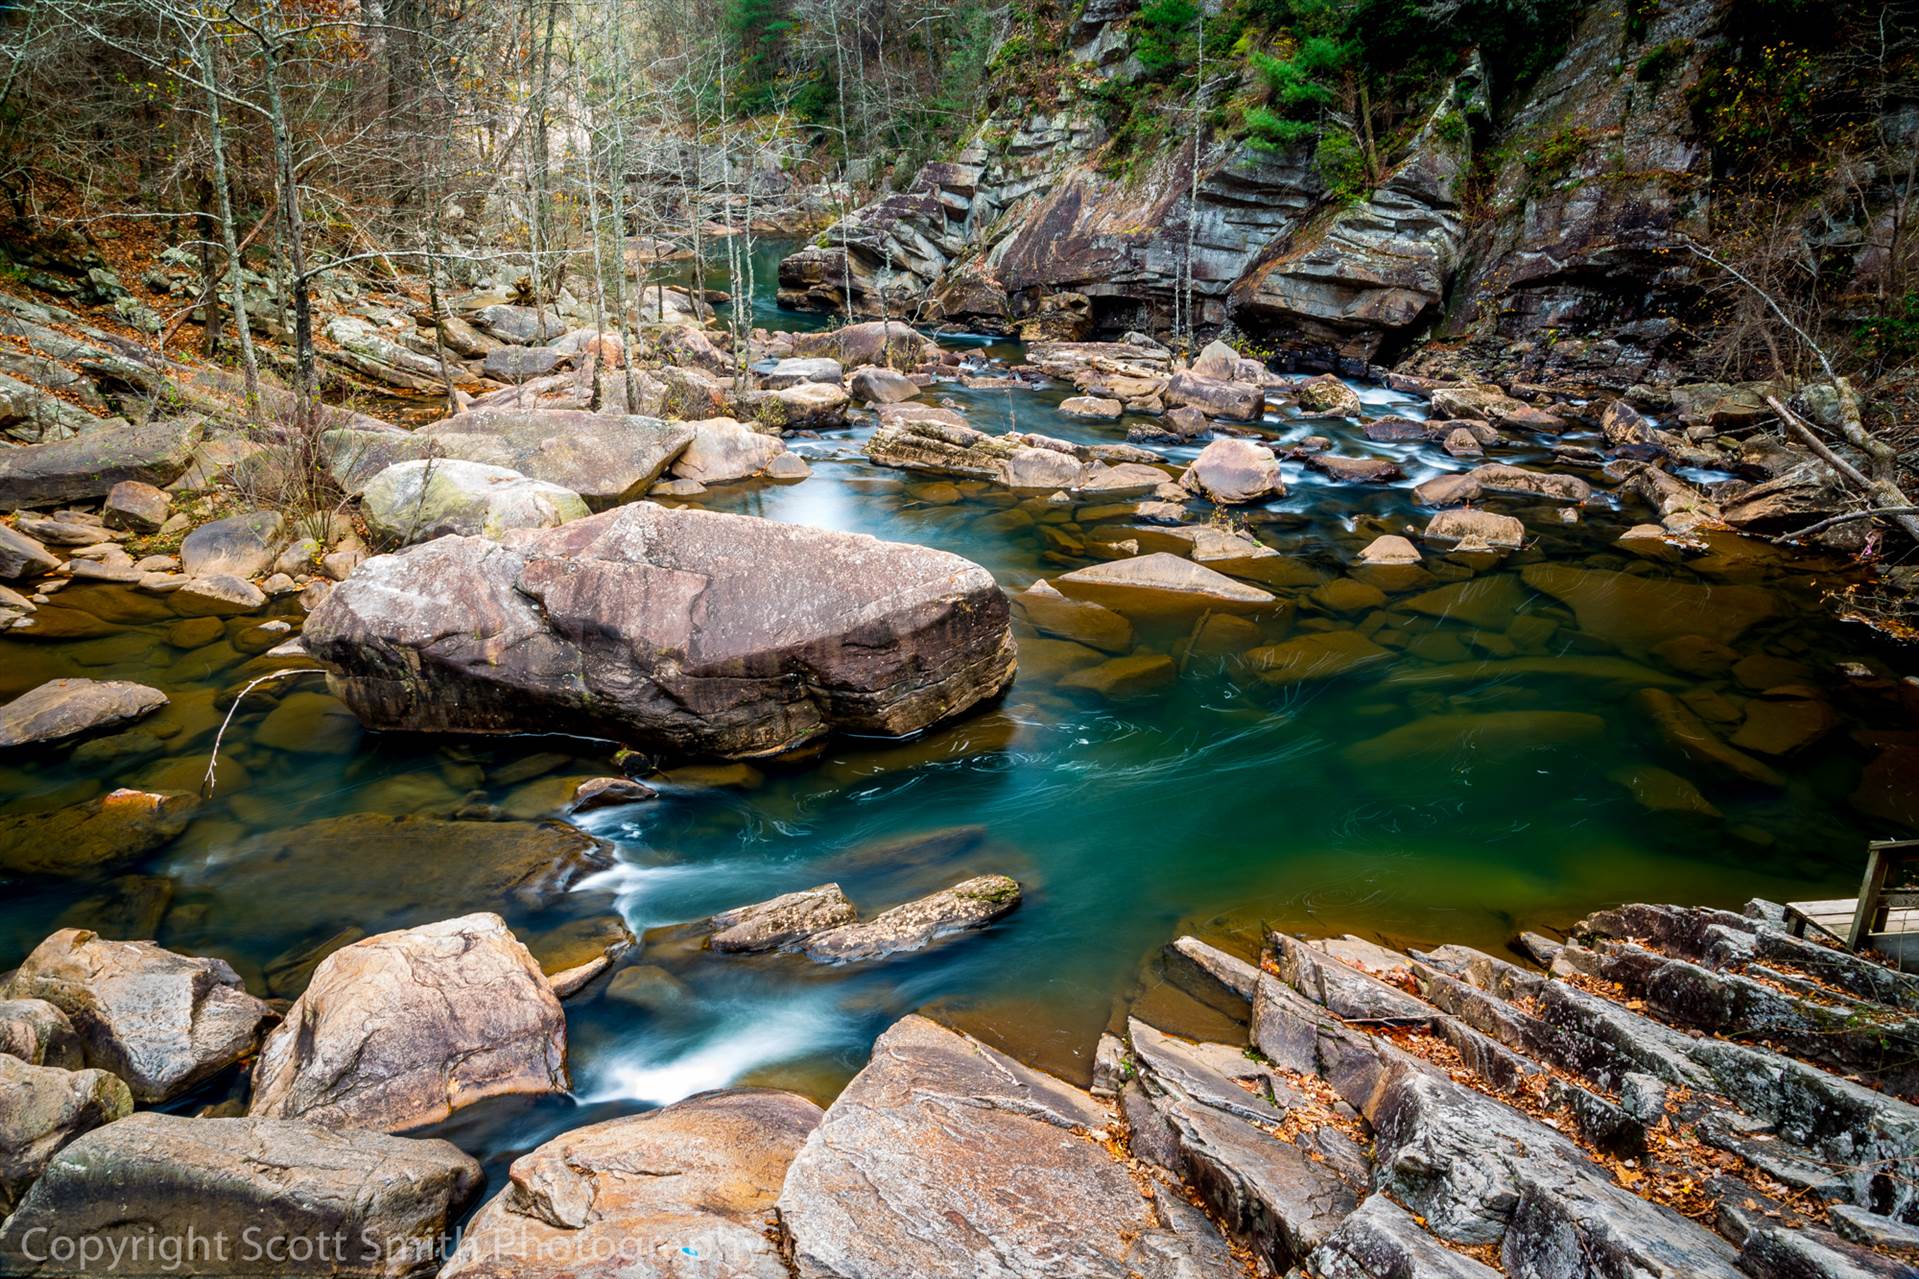 Tallulah Gorge - The beautiful emerald-green water at the bottom of Tallulah Gorge, Georgia. by Scott Smith Photos